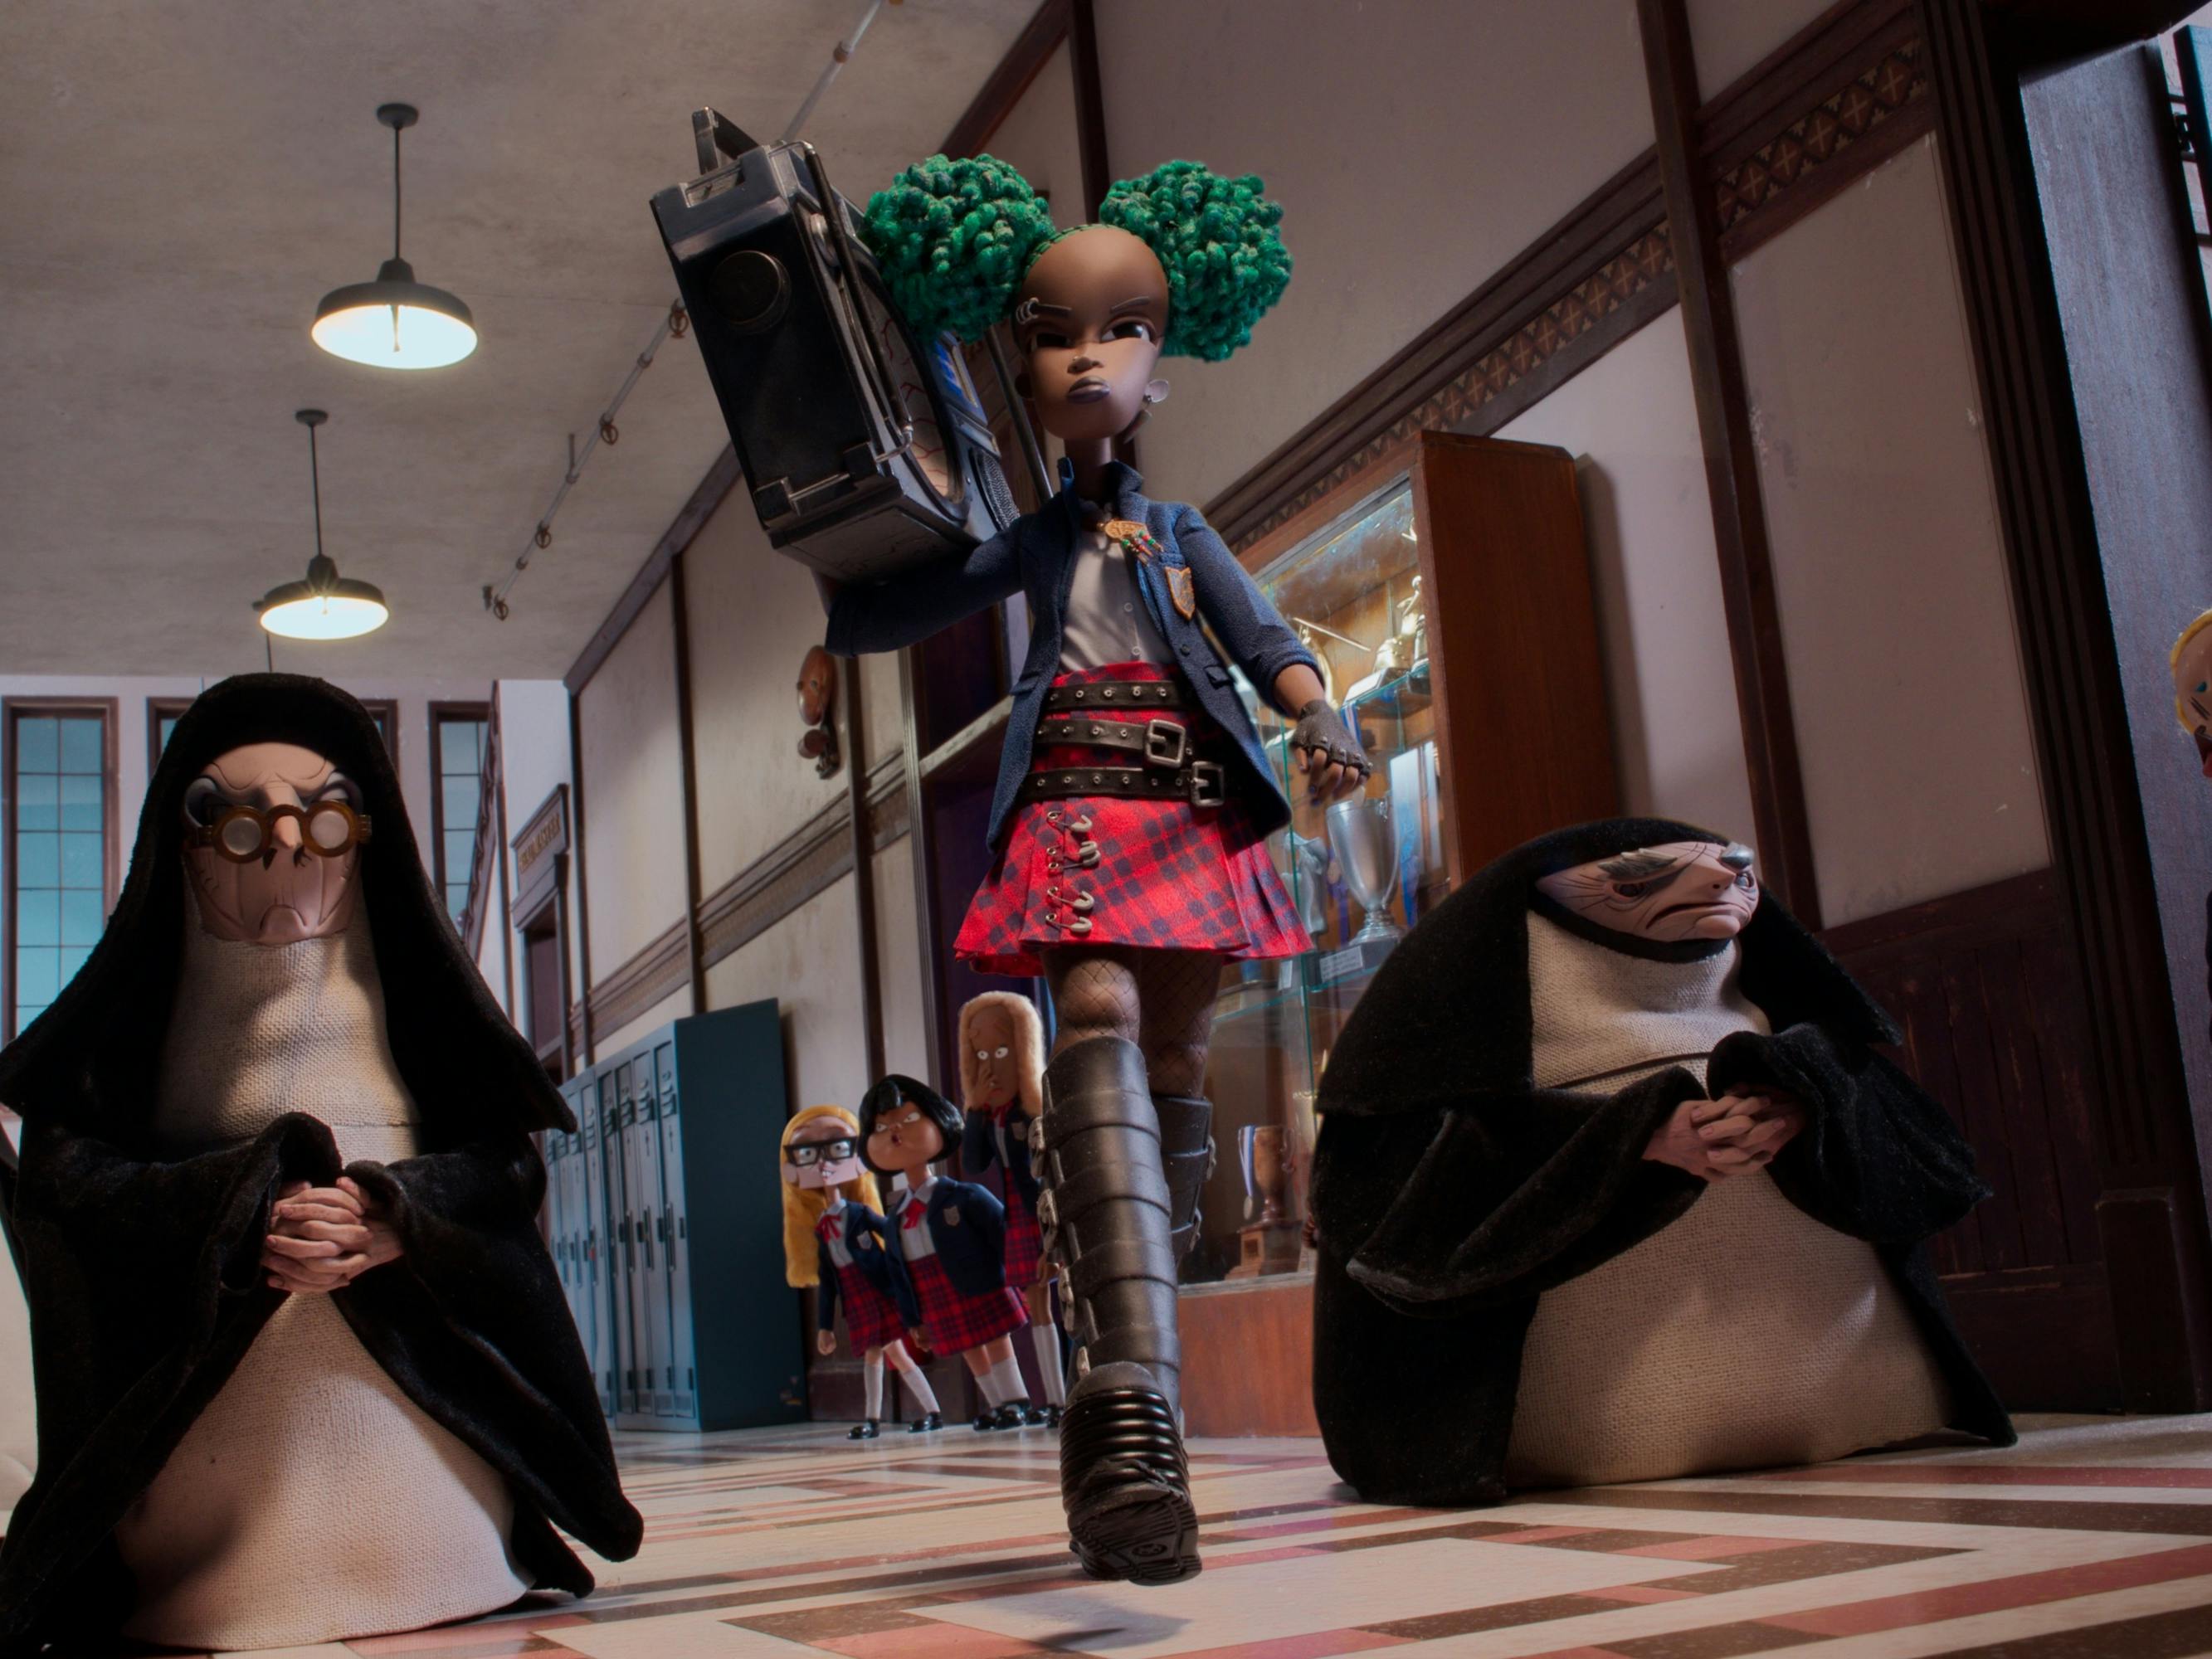 Kat (Lyric Ross) walks through a hallway of nuns and prim school girls, wearing sky high boots, a red skirt, carrying a boombox, with green hair.